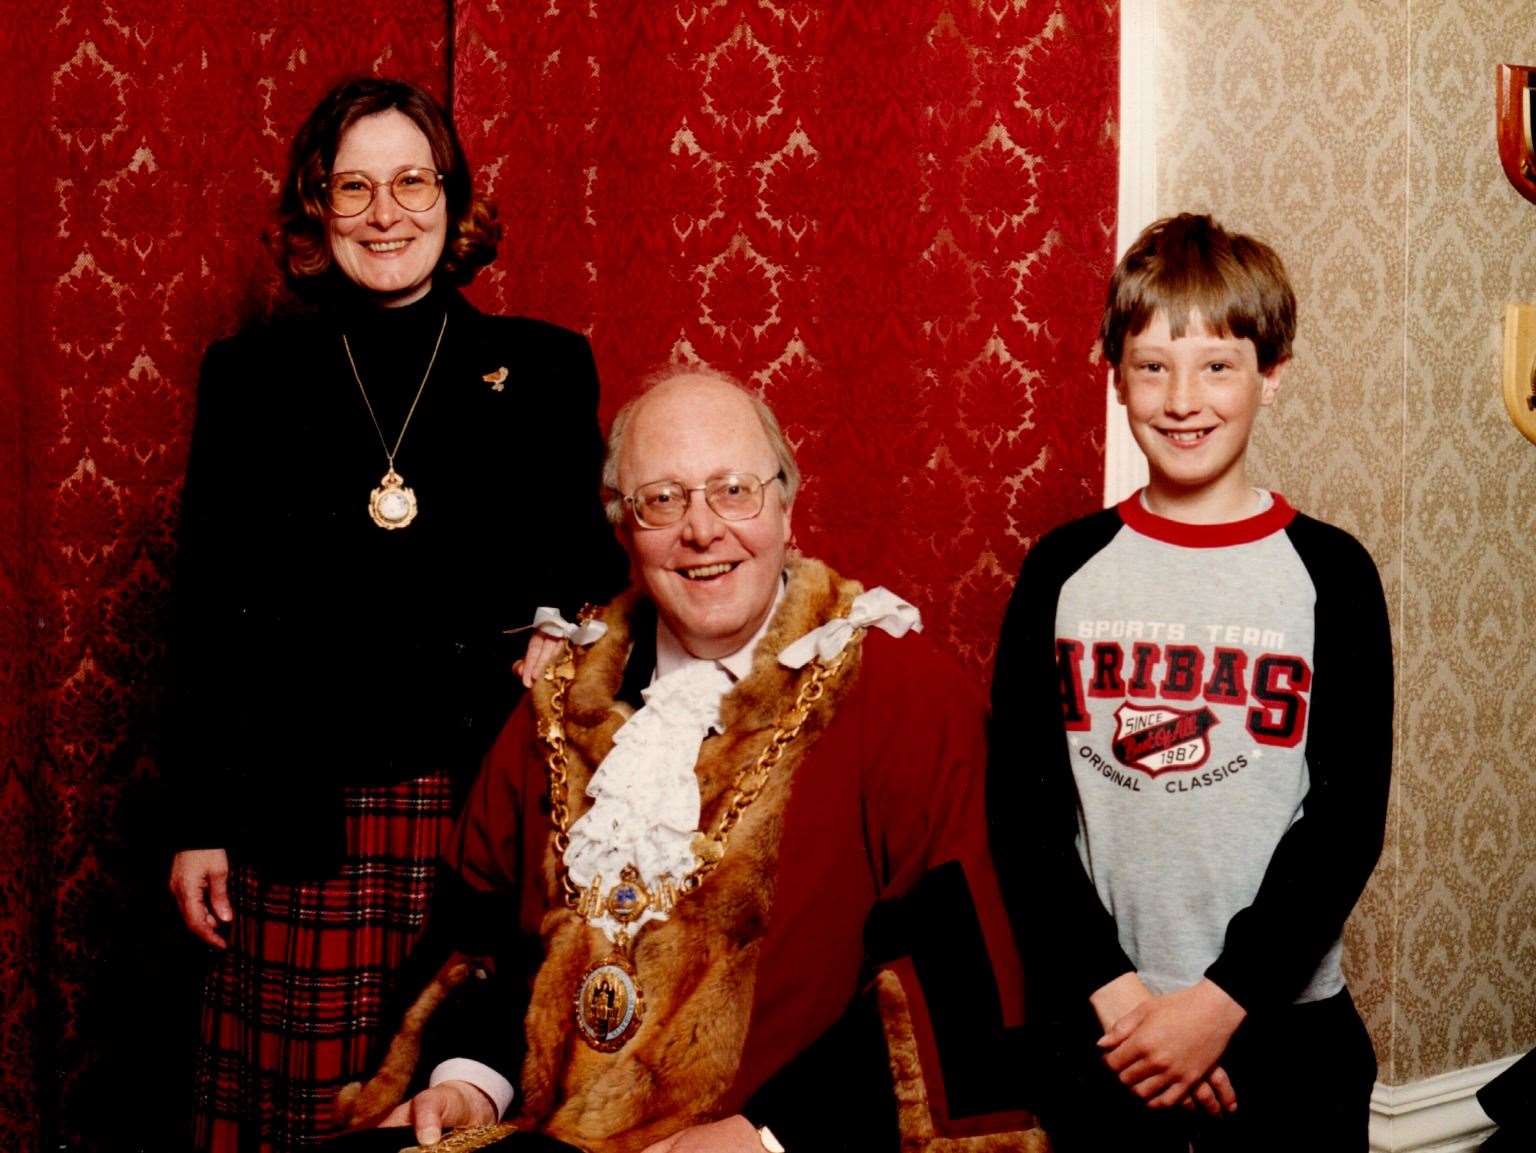 Taken in 1995 with his wife Mary and son Tom, Mike served a term as Mayor of Faversham